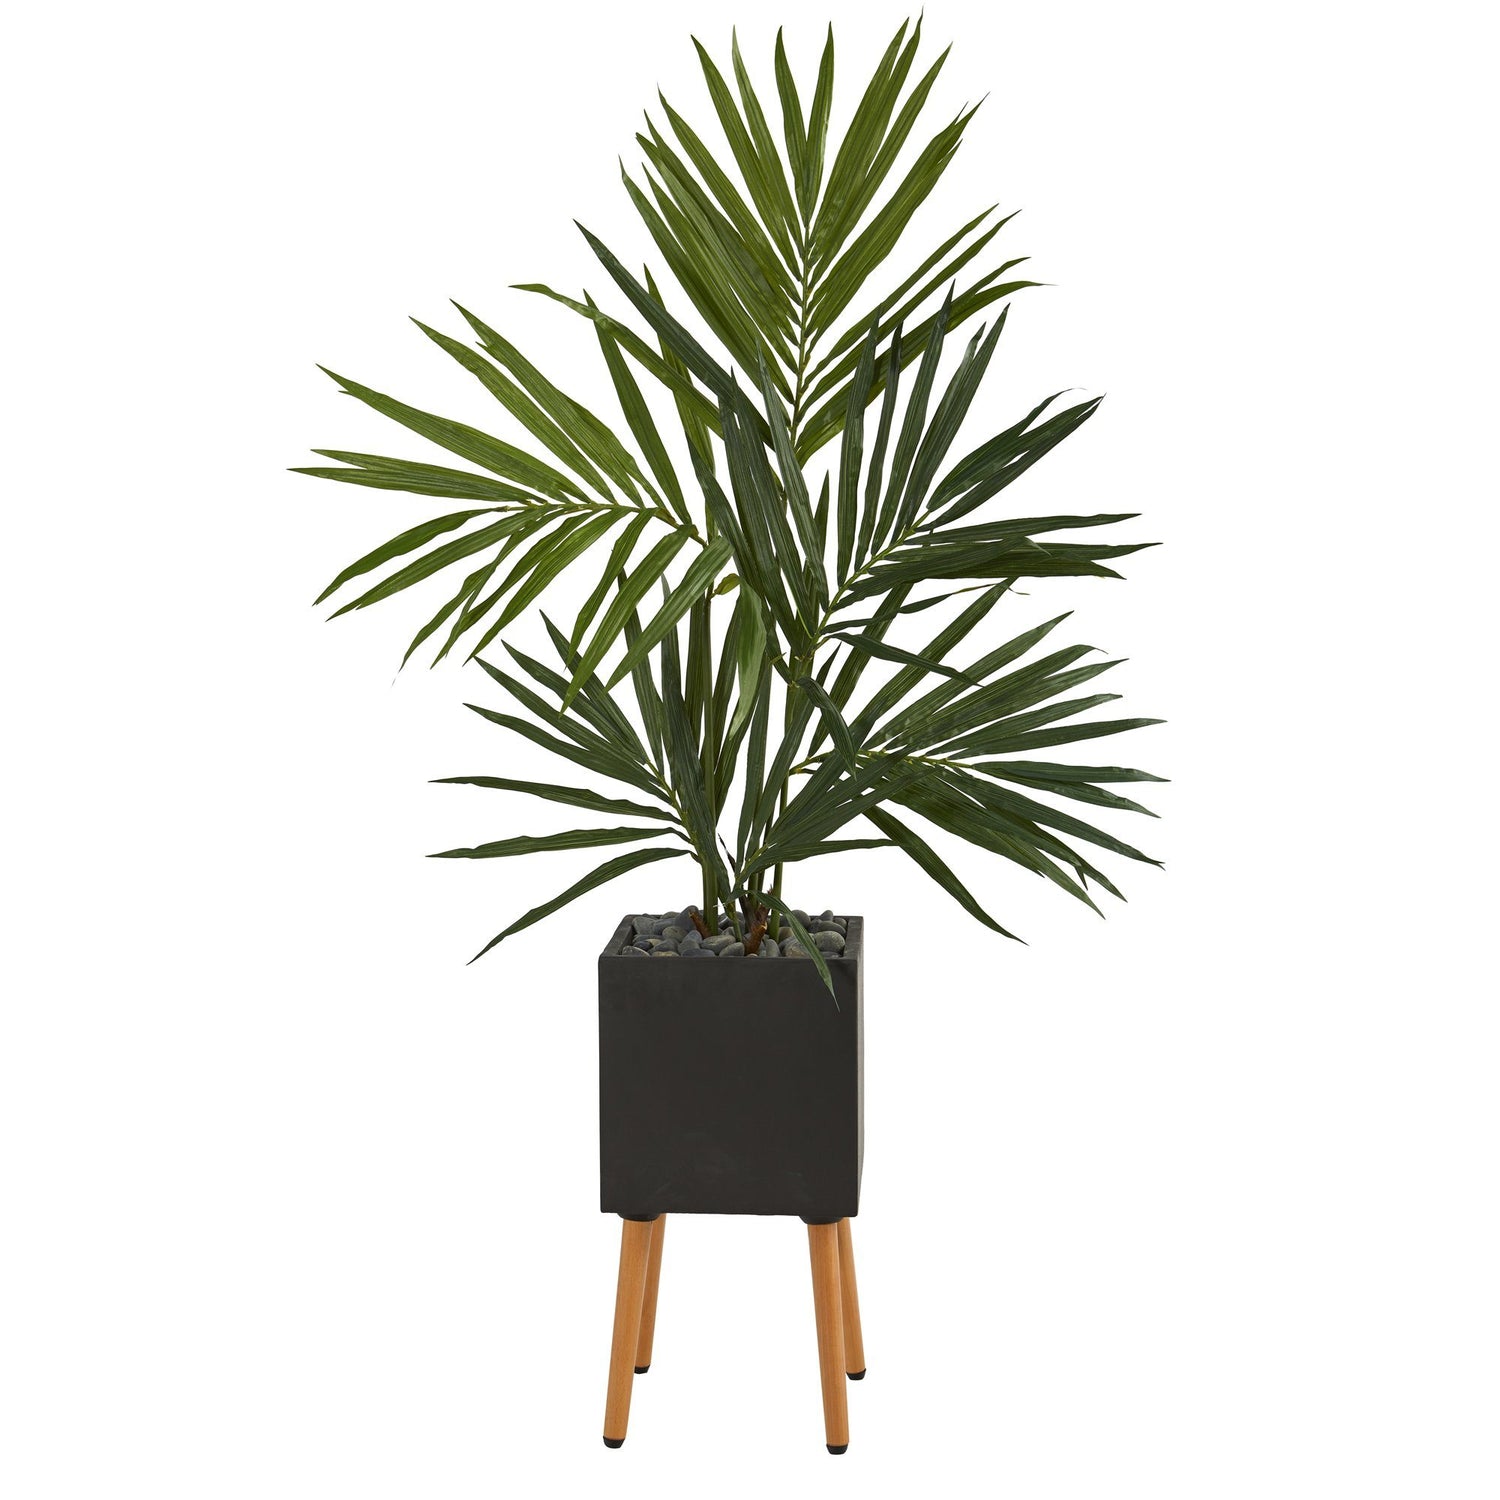 64” Kentia Artificial Palm Tree in Black Planter with Stand